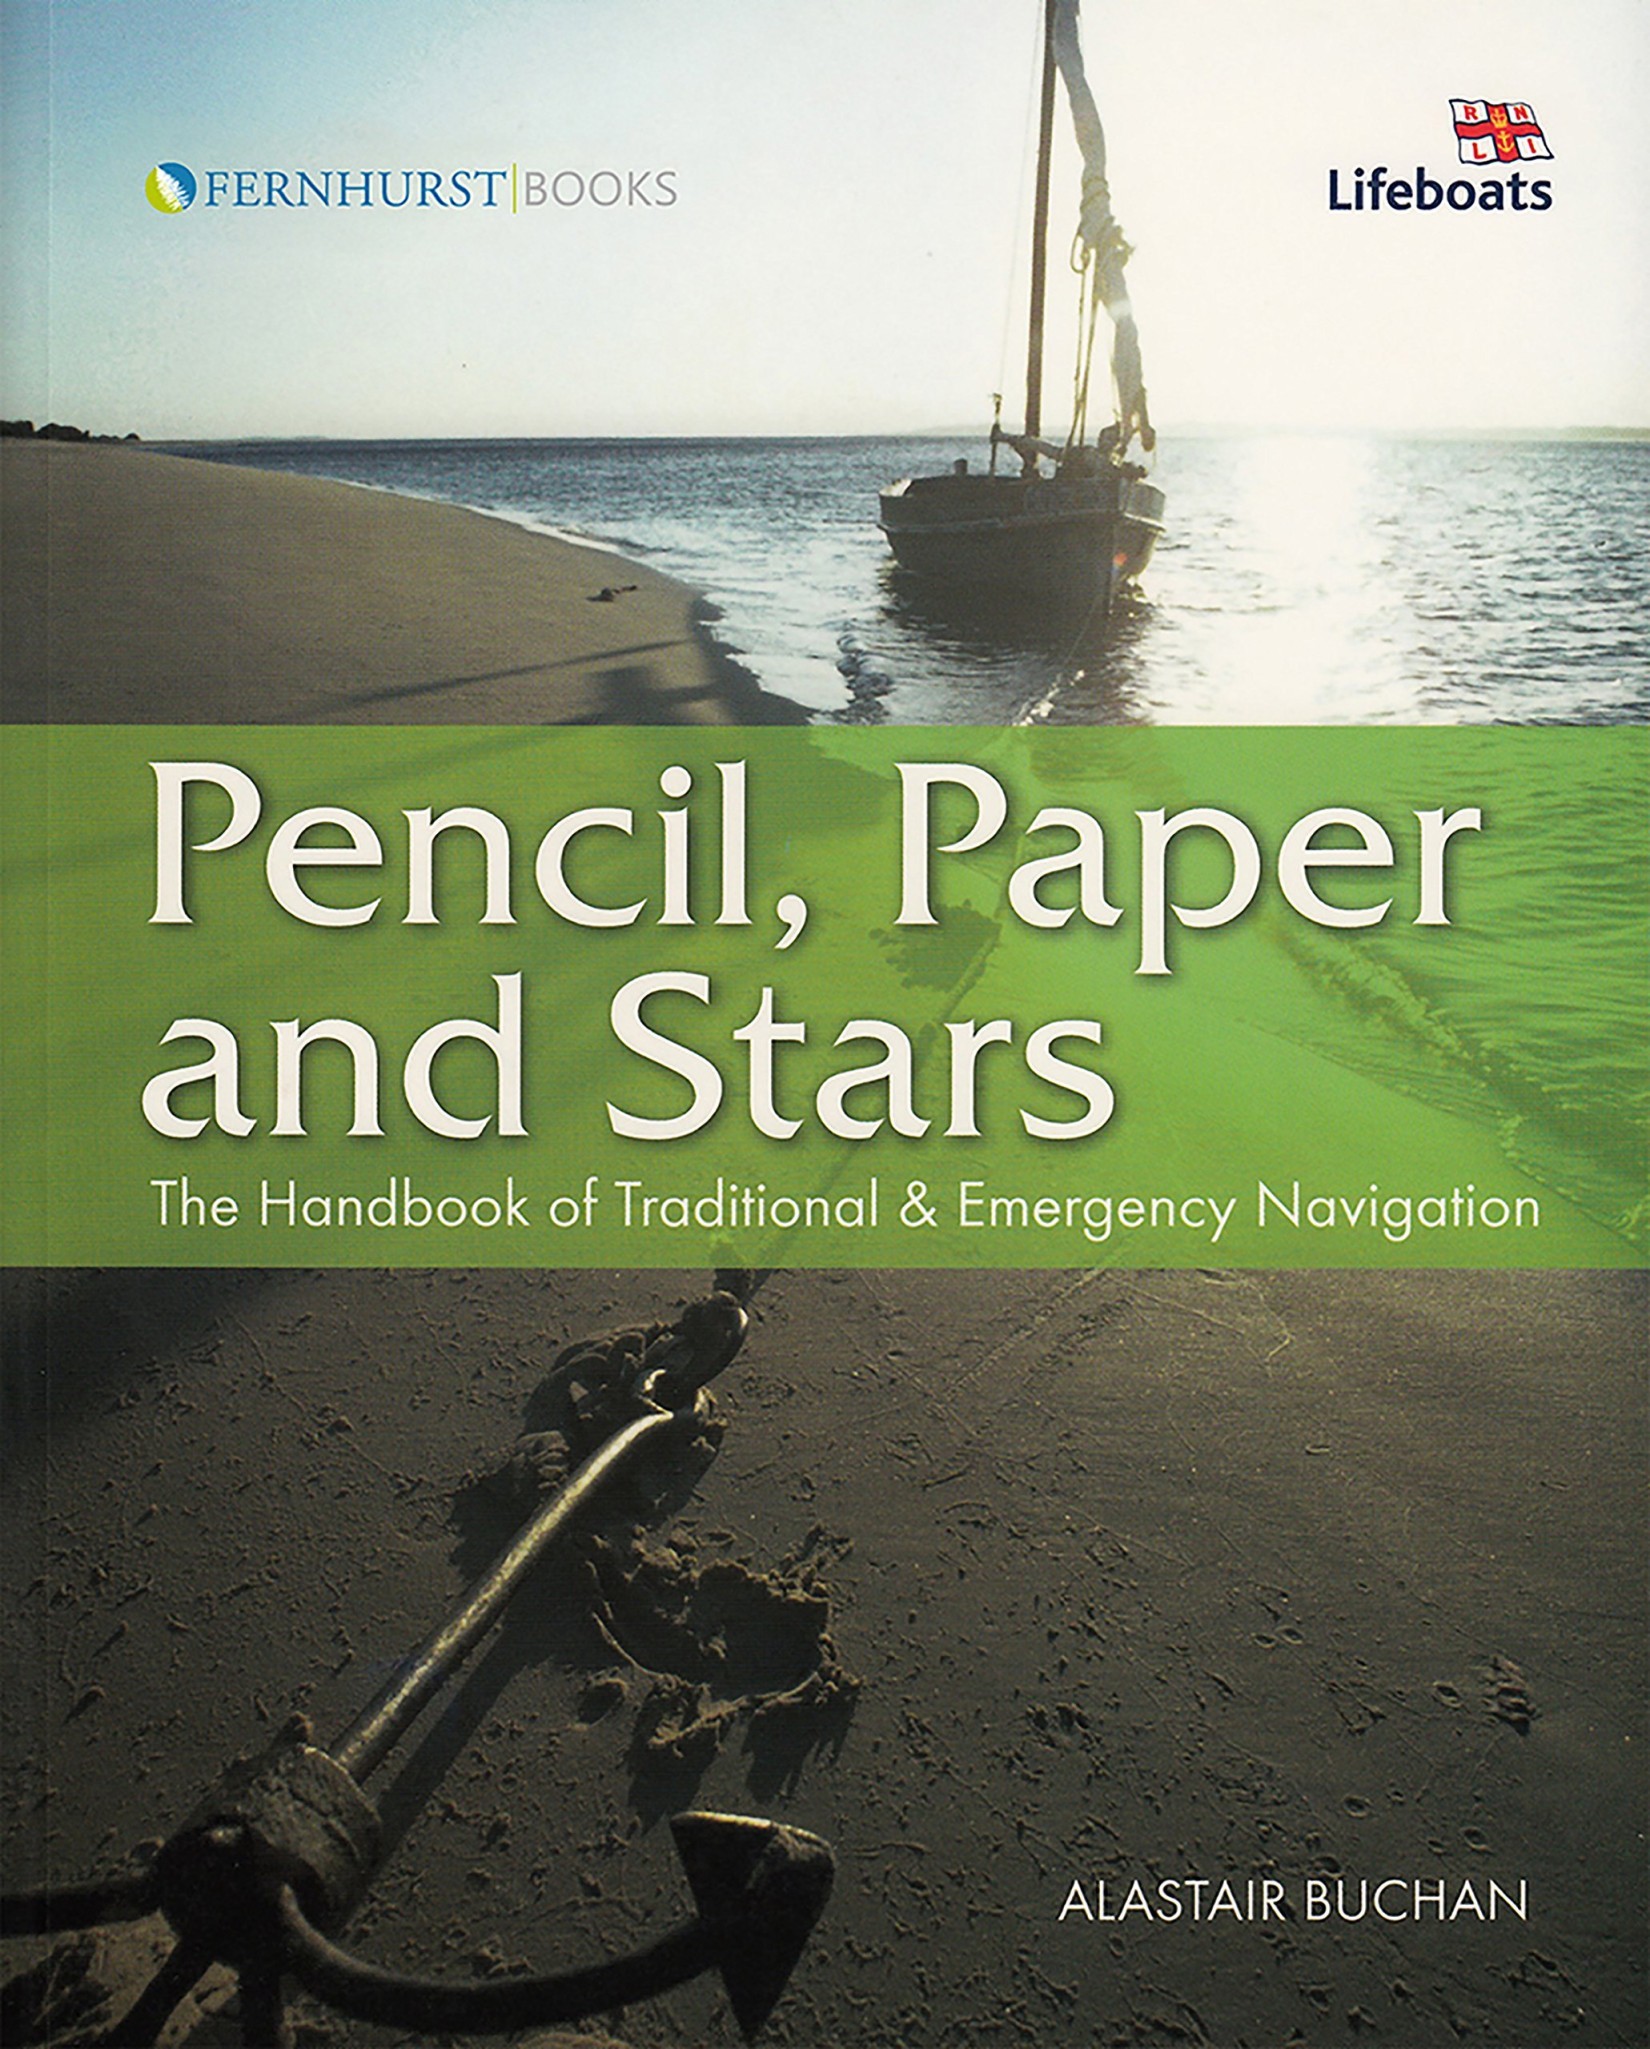 Pencil, Paper and Stars: The Handbook of Traditional and Emergency Navigation